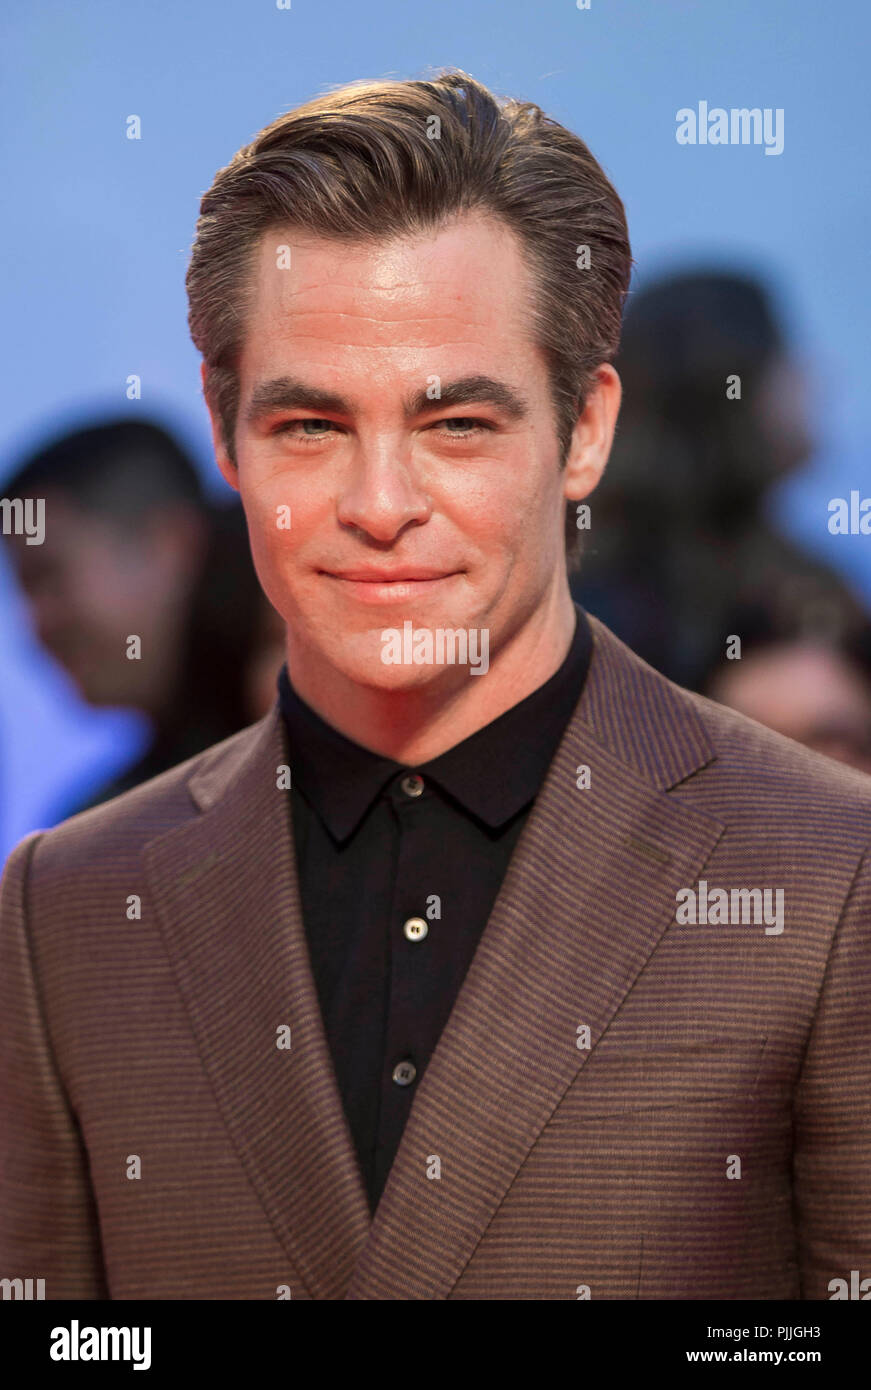 Toronto, Canada. 6th Sep, 2018. Actor Chris Pine poses for photos before the world premiere of the opening film "Outlaw King" at Roy Thomson Hall during the 2018 Toronto International Film Festival (TIFF) in Toronto, Canada, Sept. 6, 2018. Credit: Zou Zheng/Xinhua/Alamy Live News Stock Photo